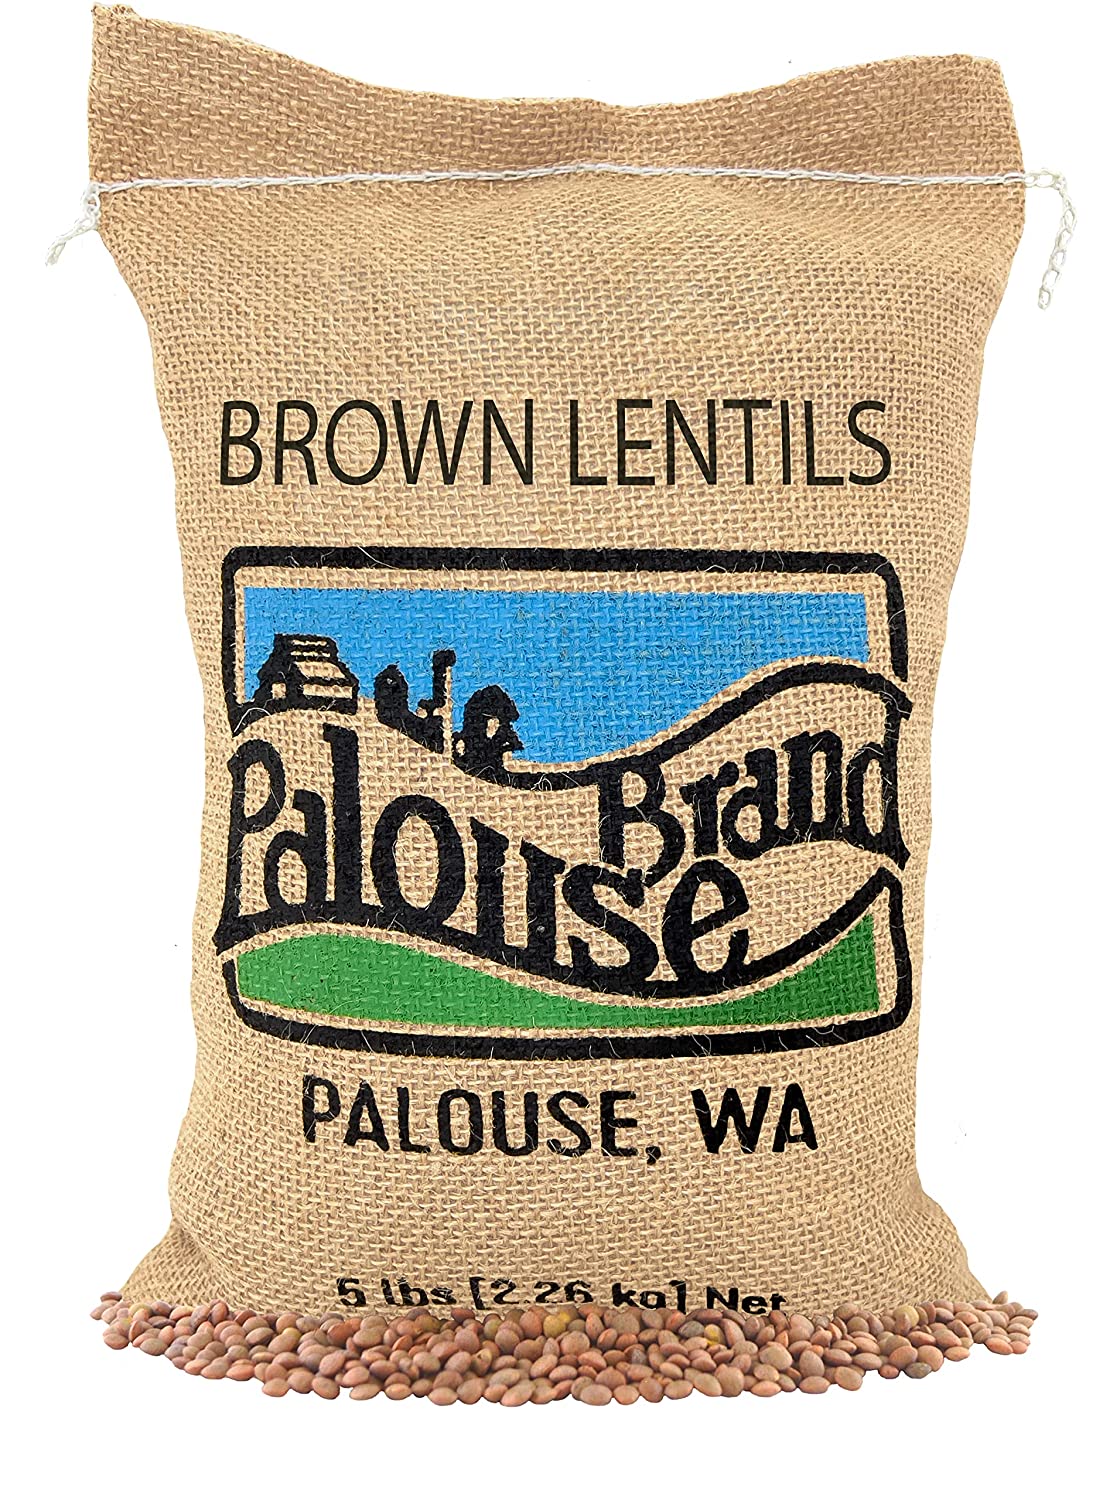 Palouse Brand Vegan Locally Owned Dried Lentils